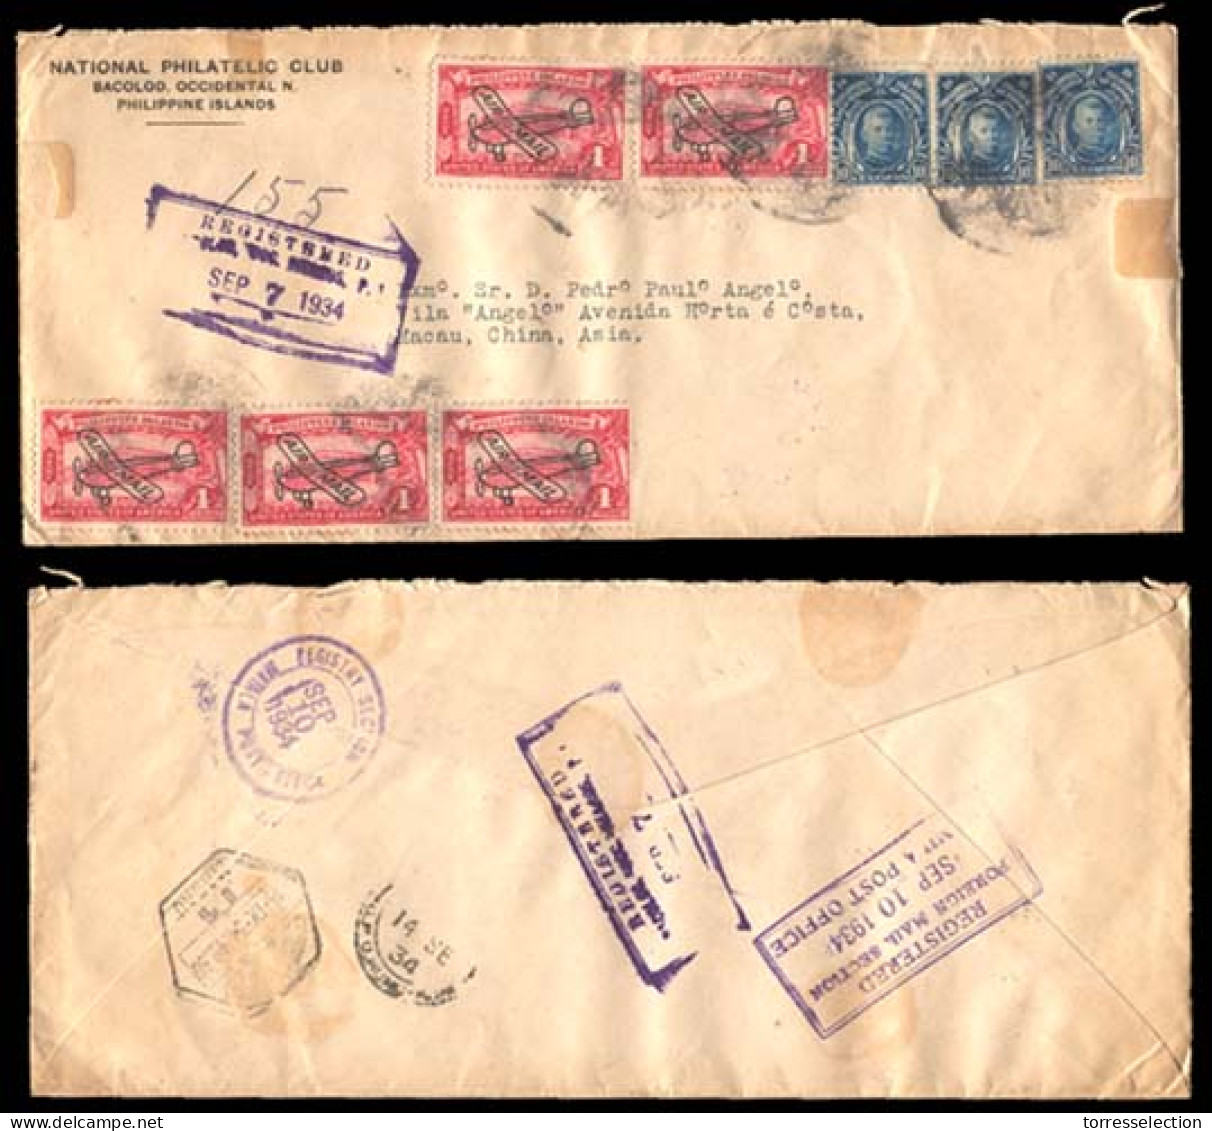 PHILIPPINES. 1934 (Sept. 7). PHILIPPINES-MACAU. Bacolod To Macau. Registered Airmail Envelope Via Manila (Sept. 10) And  - Philippines